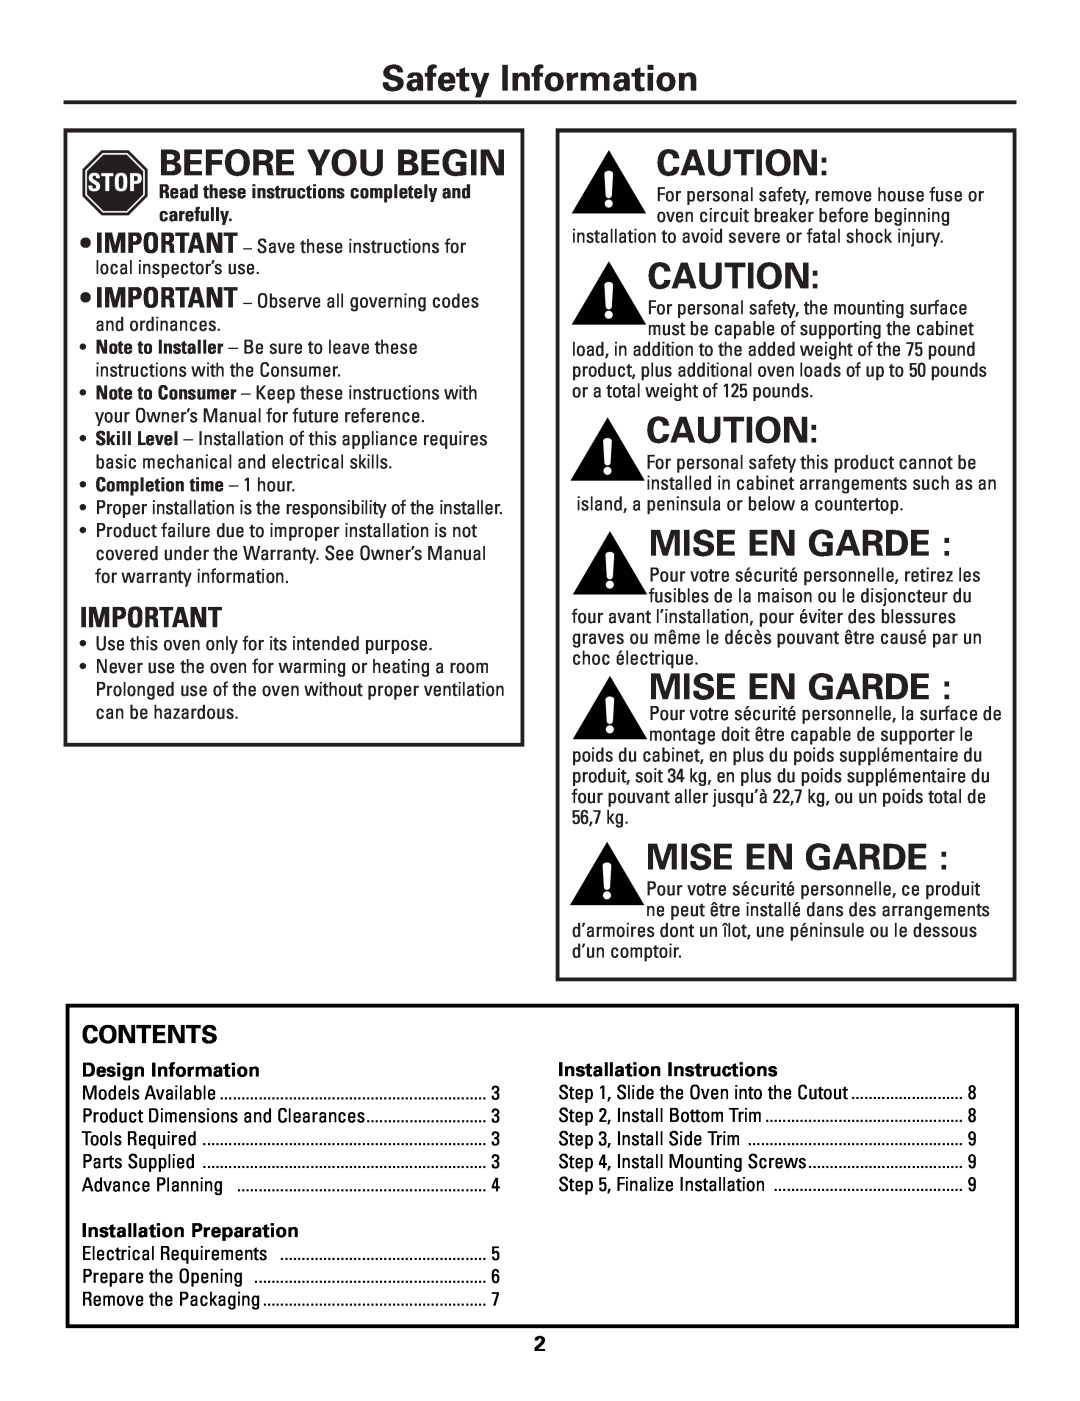 GE ZSC1001 Safety Information, Before You Begin, Mise En Garde, Contents, Read these instructions completely and carefully 